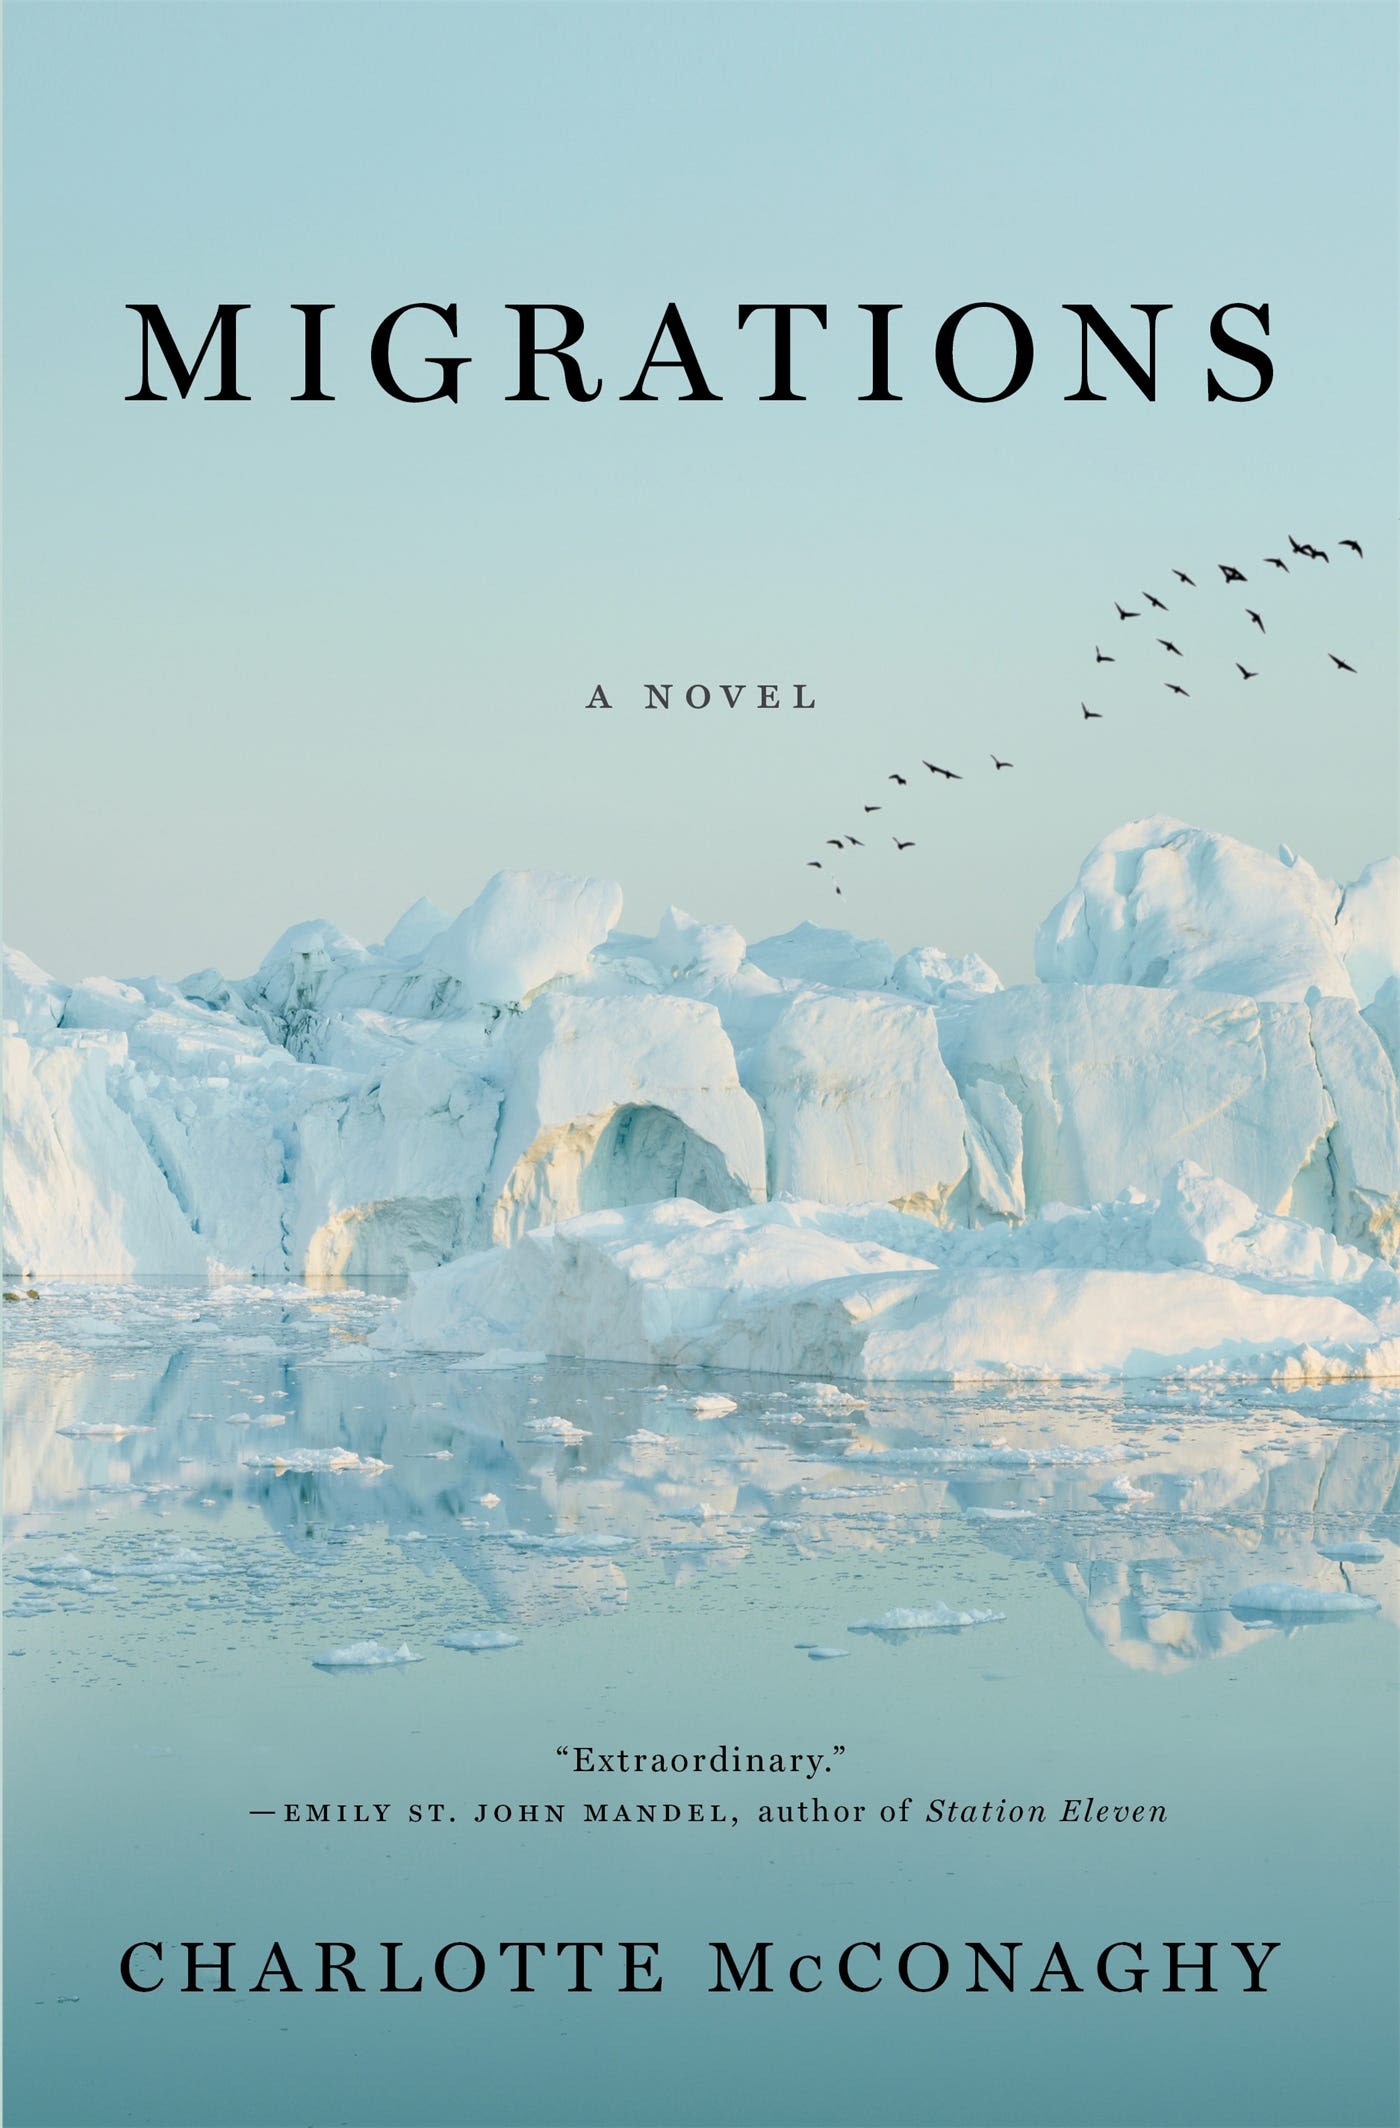 Charlotte McConaghy's 'Migrations' is this year's One Read